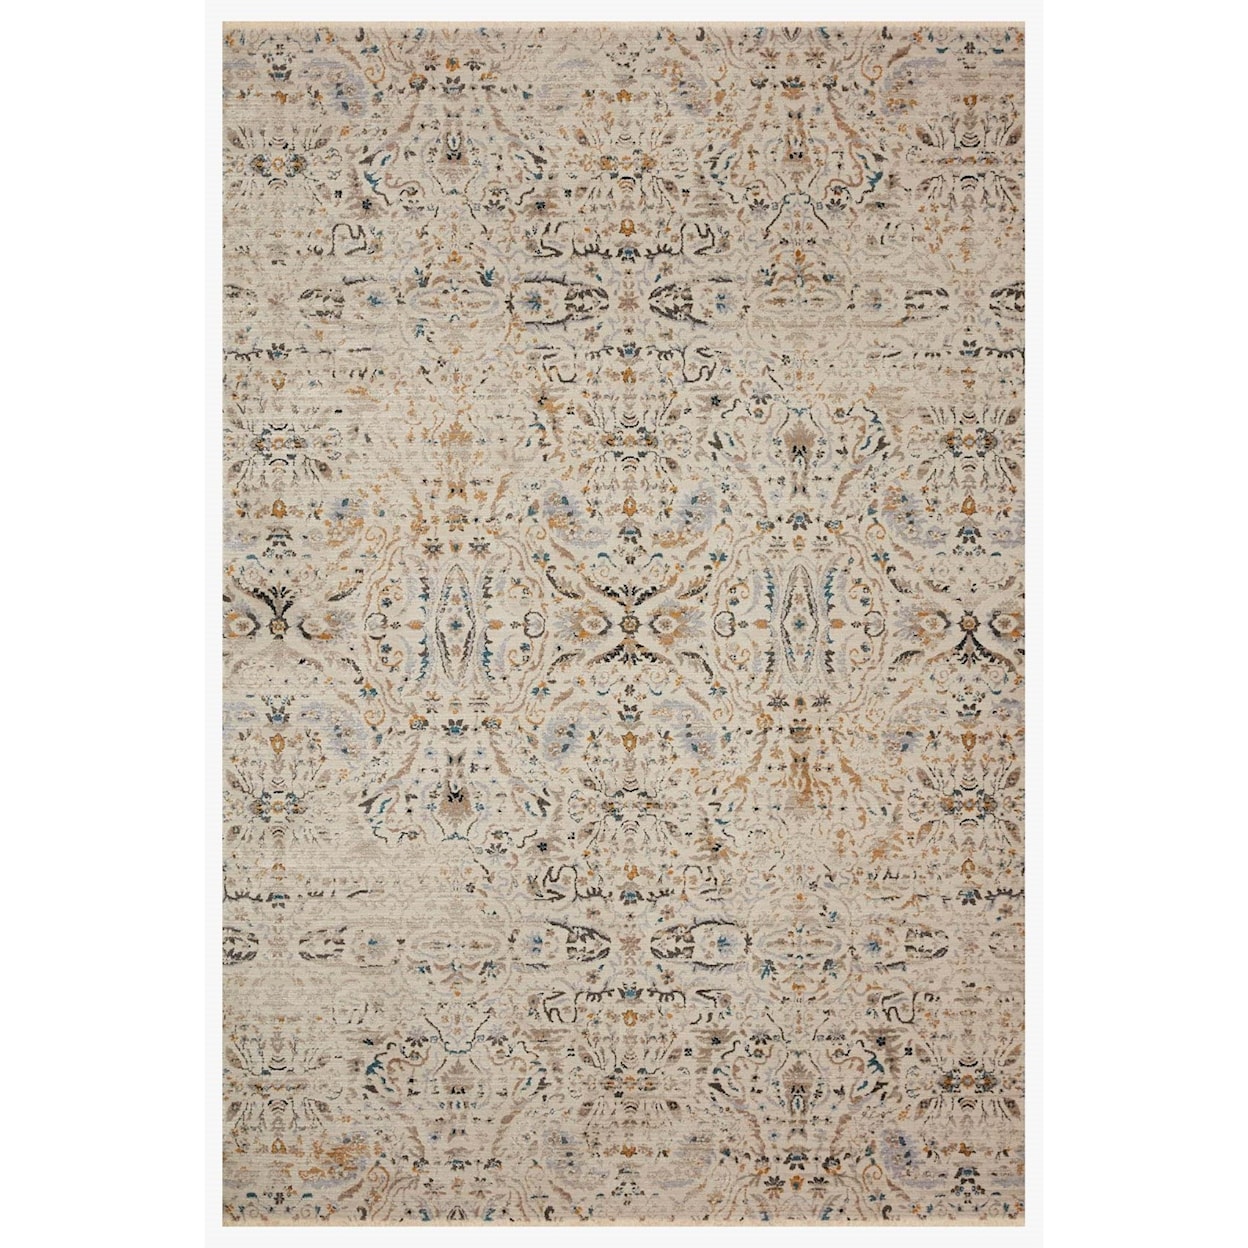 Reeds Rugs Leigh 4'0" x 5'5" Ivory / Straw Rug